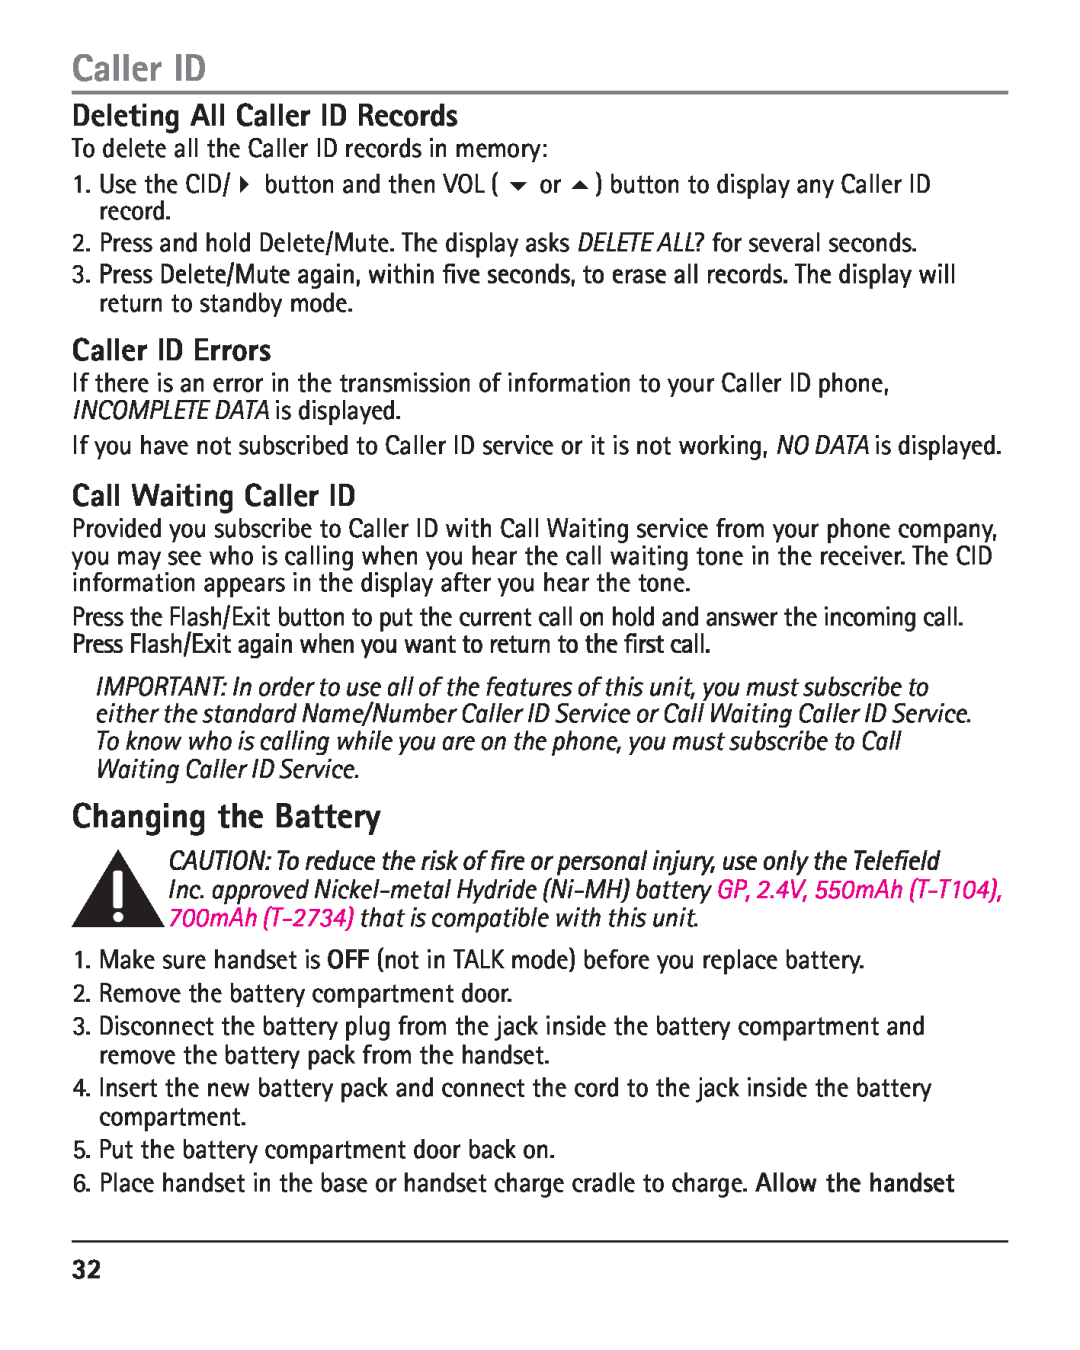 RCA 25420 manual Changing the Battery, Deleting All Caller ID Records, Caller ID Errors, Call Waiting Caller ID 